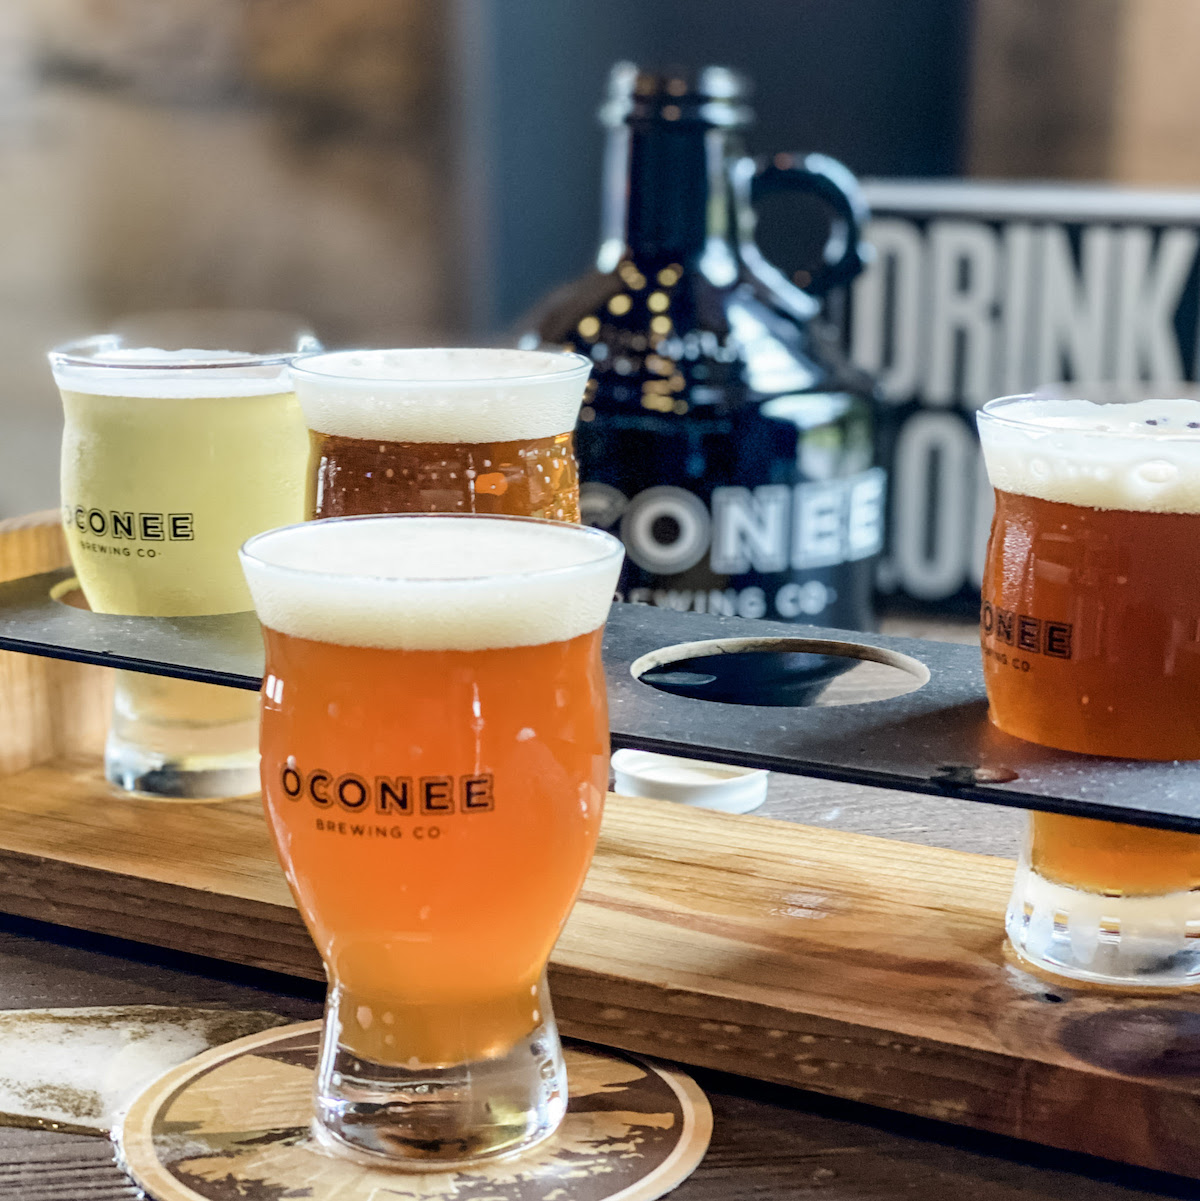 Oconee Brewing to anchor new mixed-project by Lake Oconee